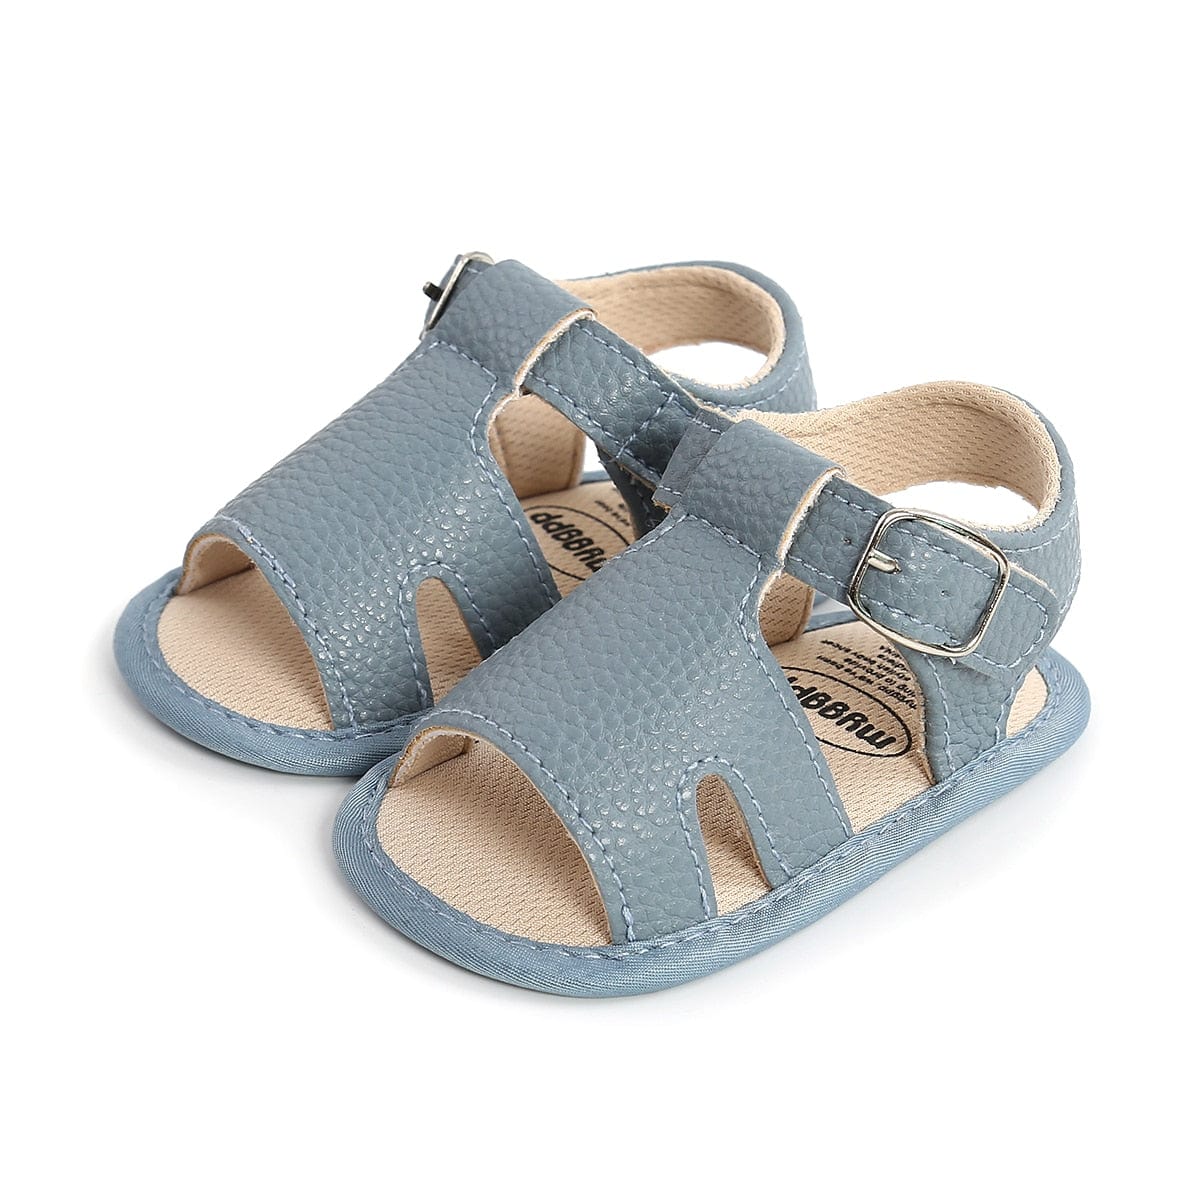 Proactive Baby Baby Footwear B3 / 0-6 Months / China MYGGPP Fashion Baby Sandals For Little Ones